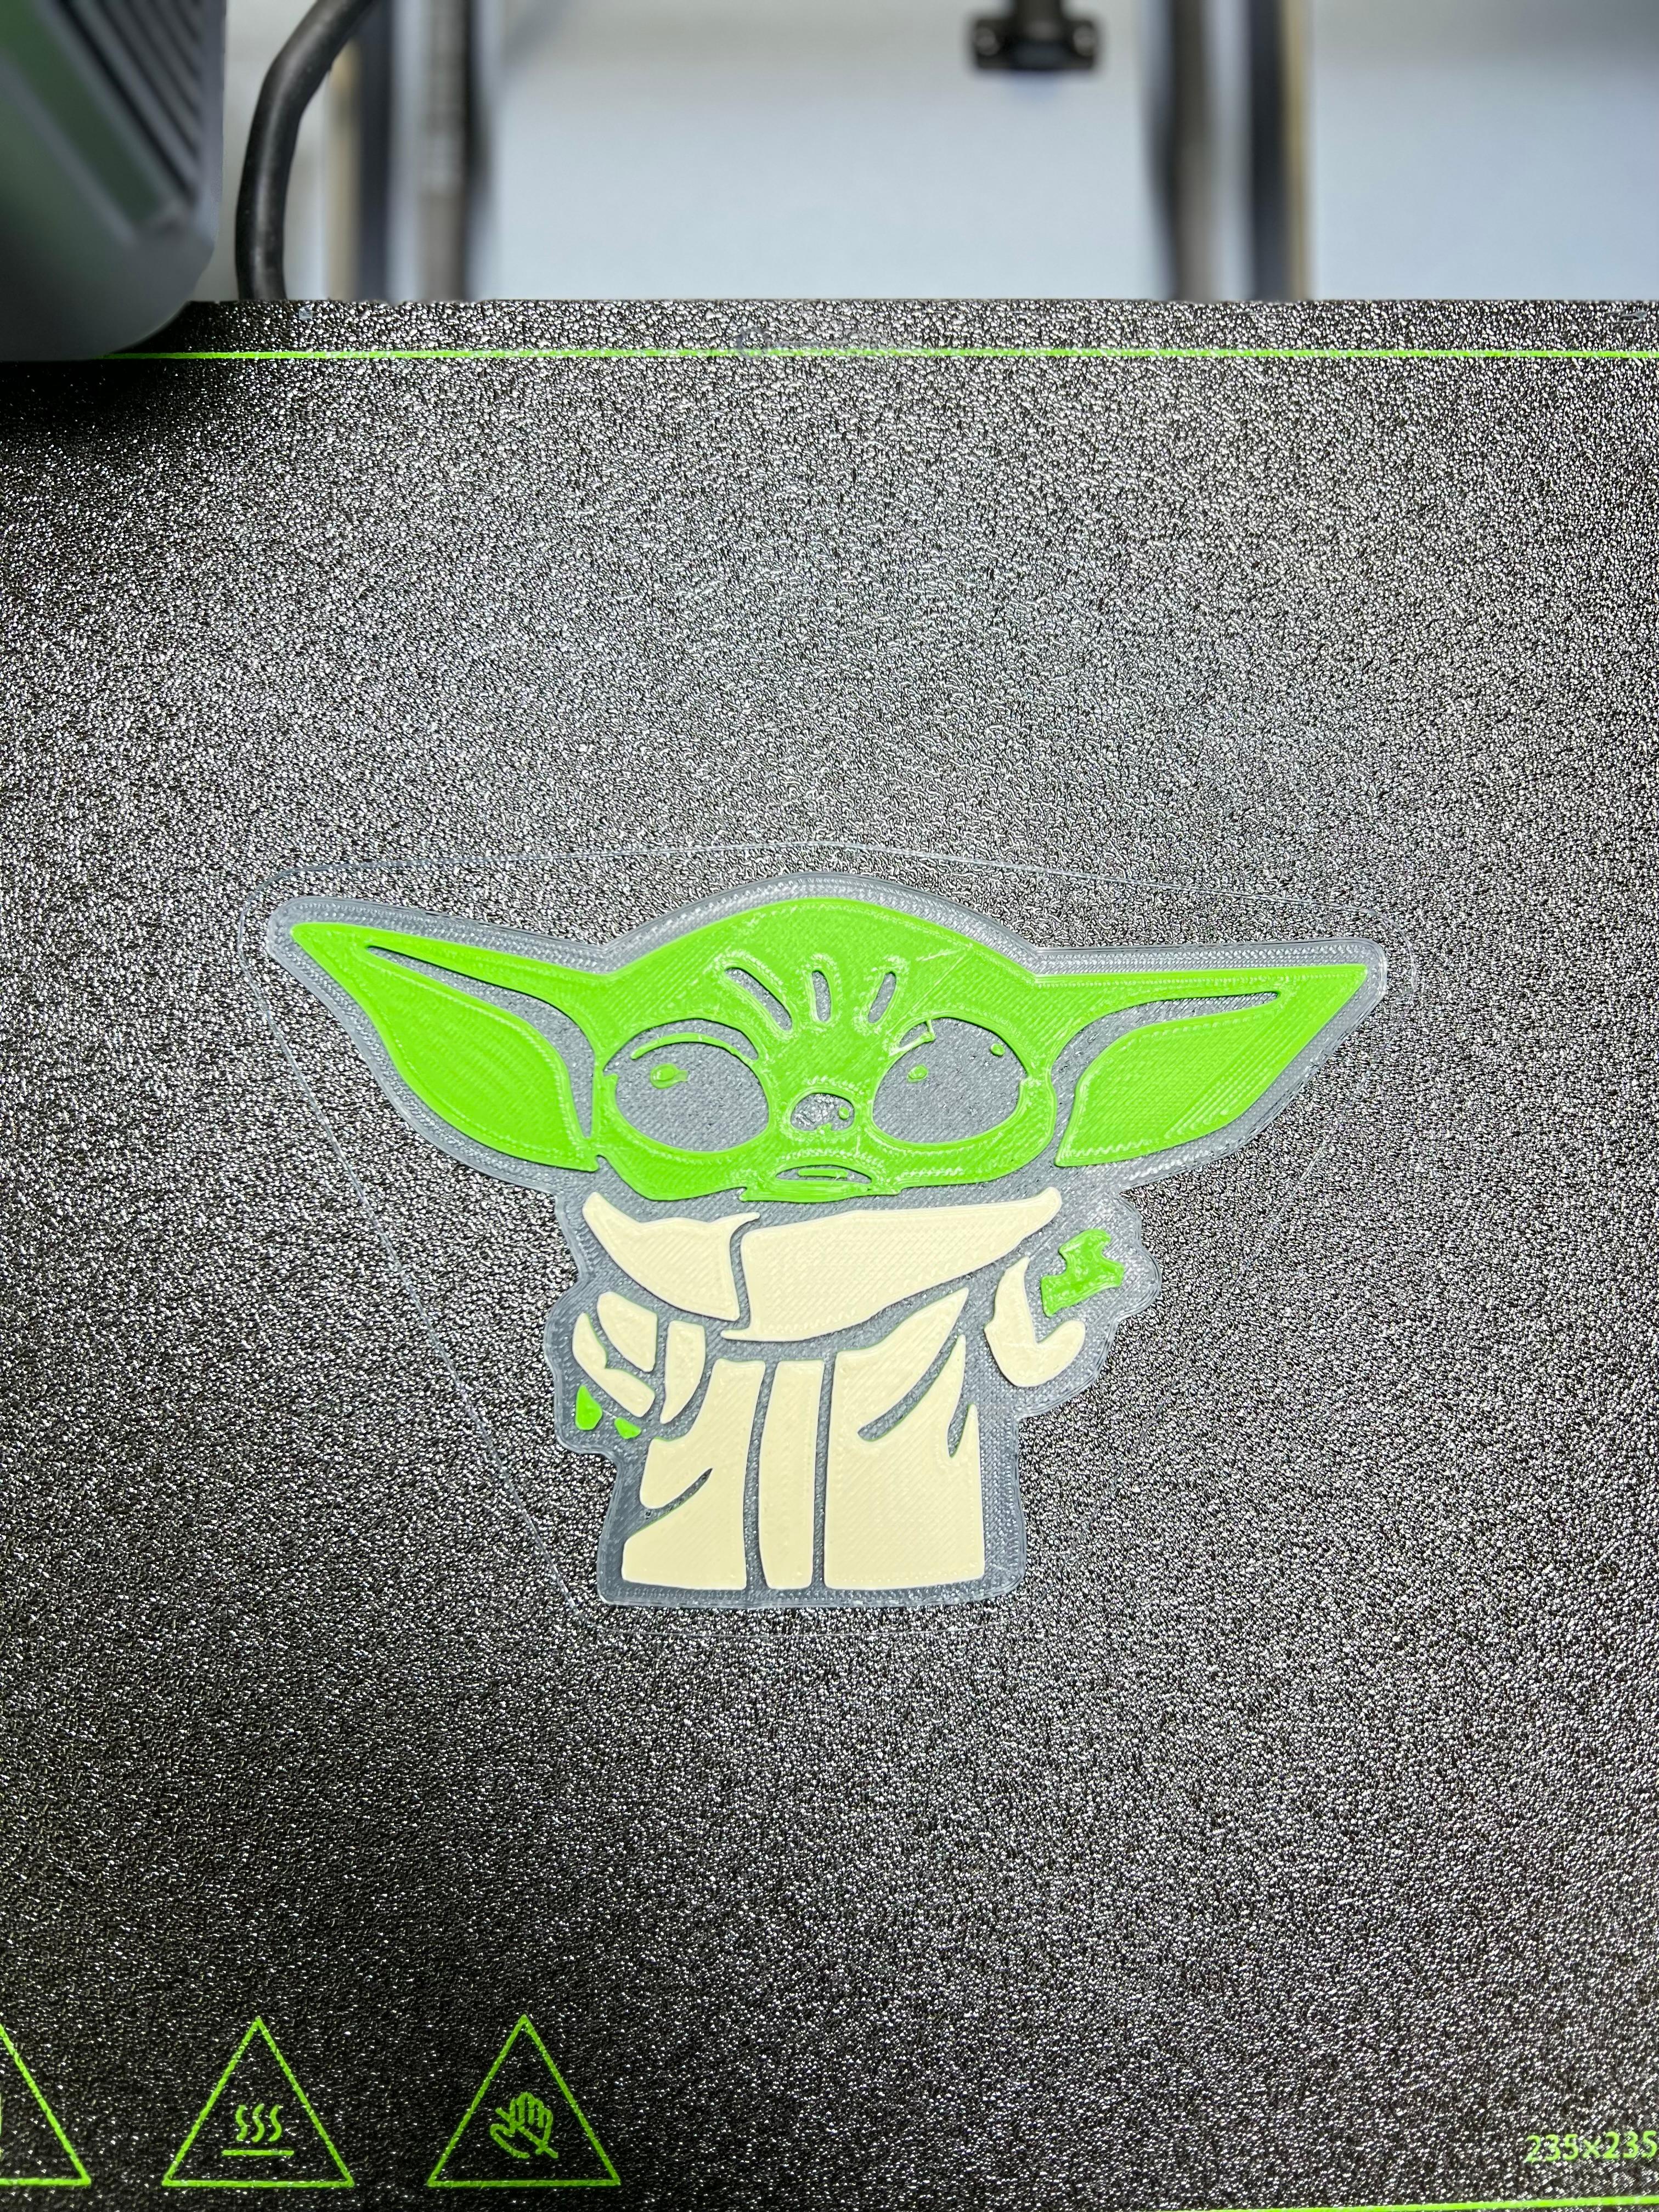 Grogu(The child/Baby Yoda) Multi color single extruder sign - My Print!!
Scaled down. - 3d model